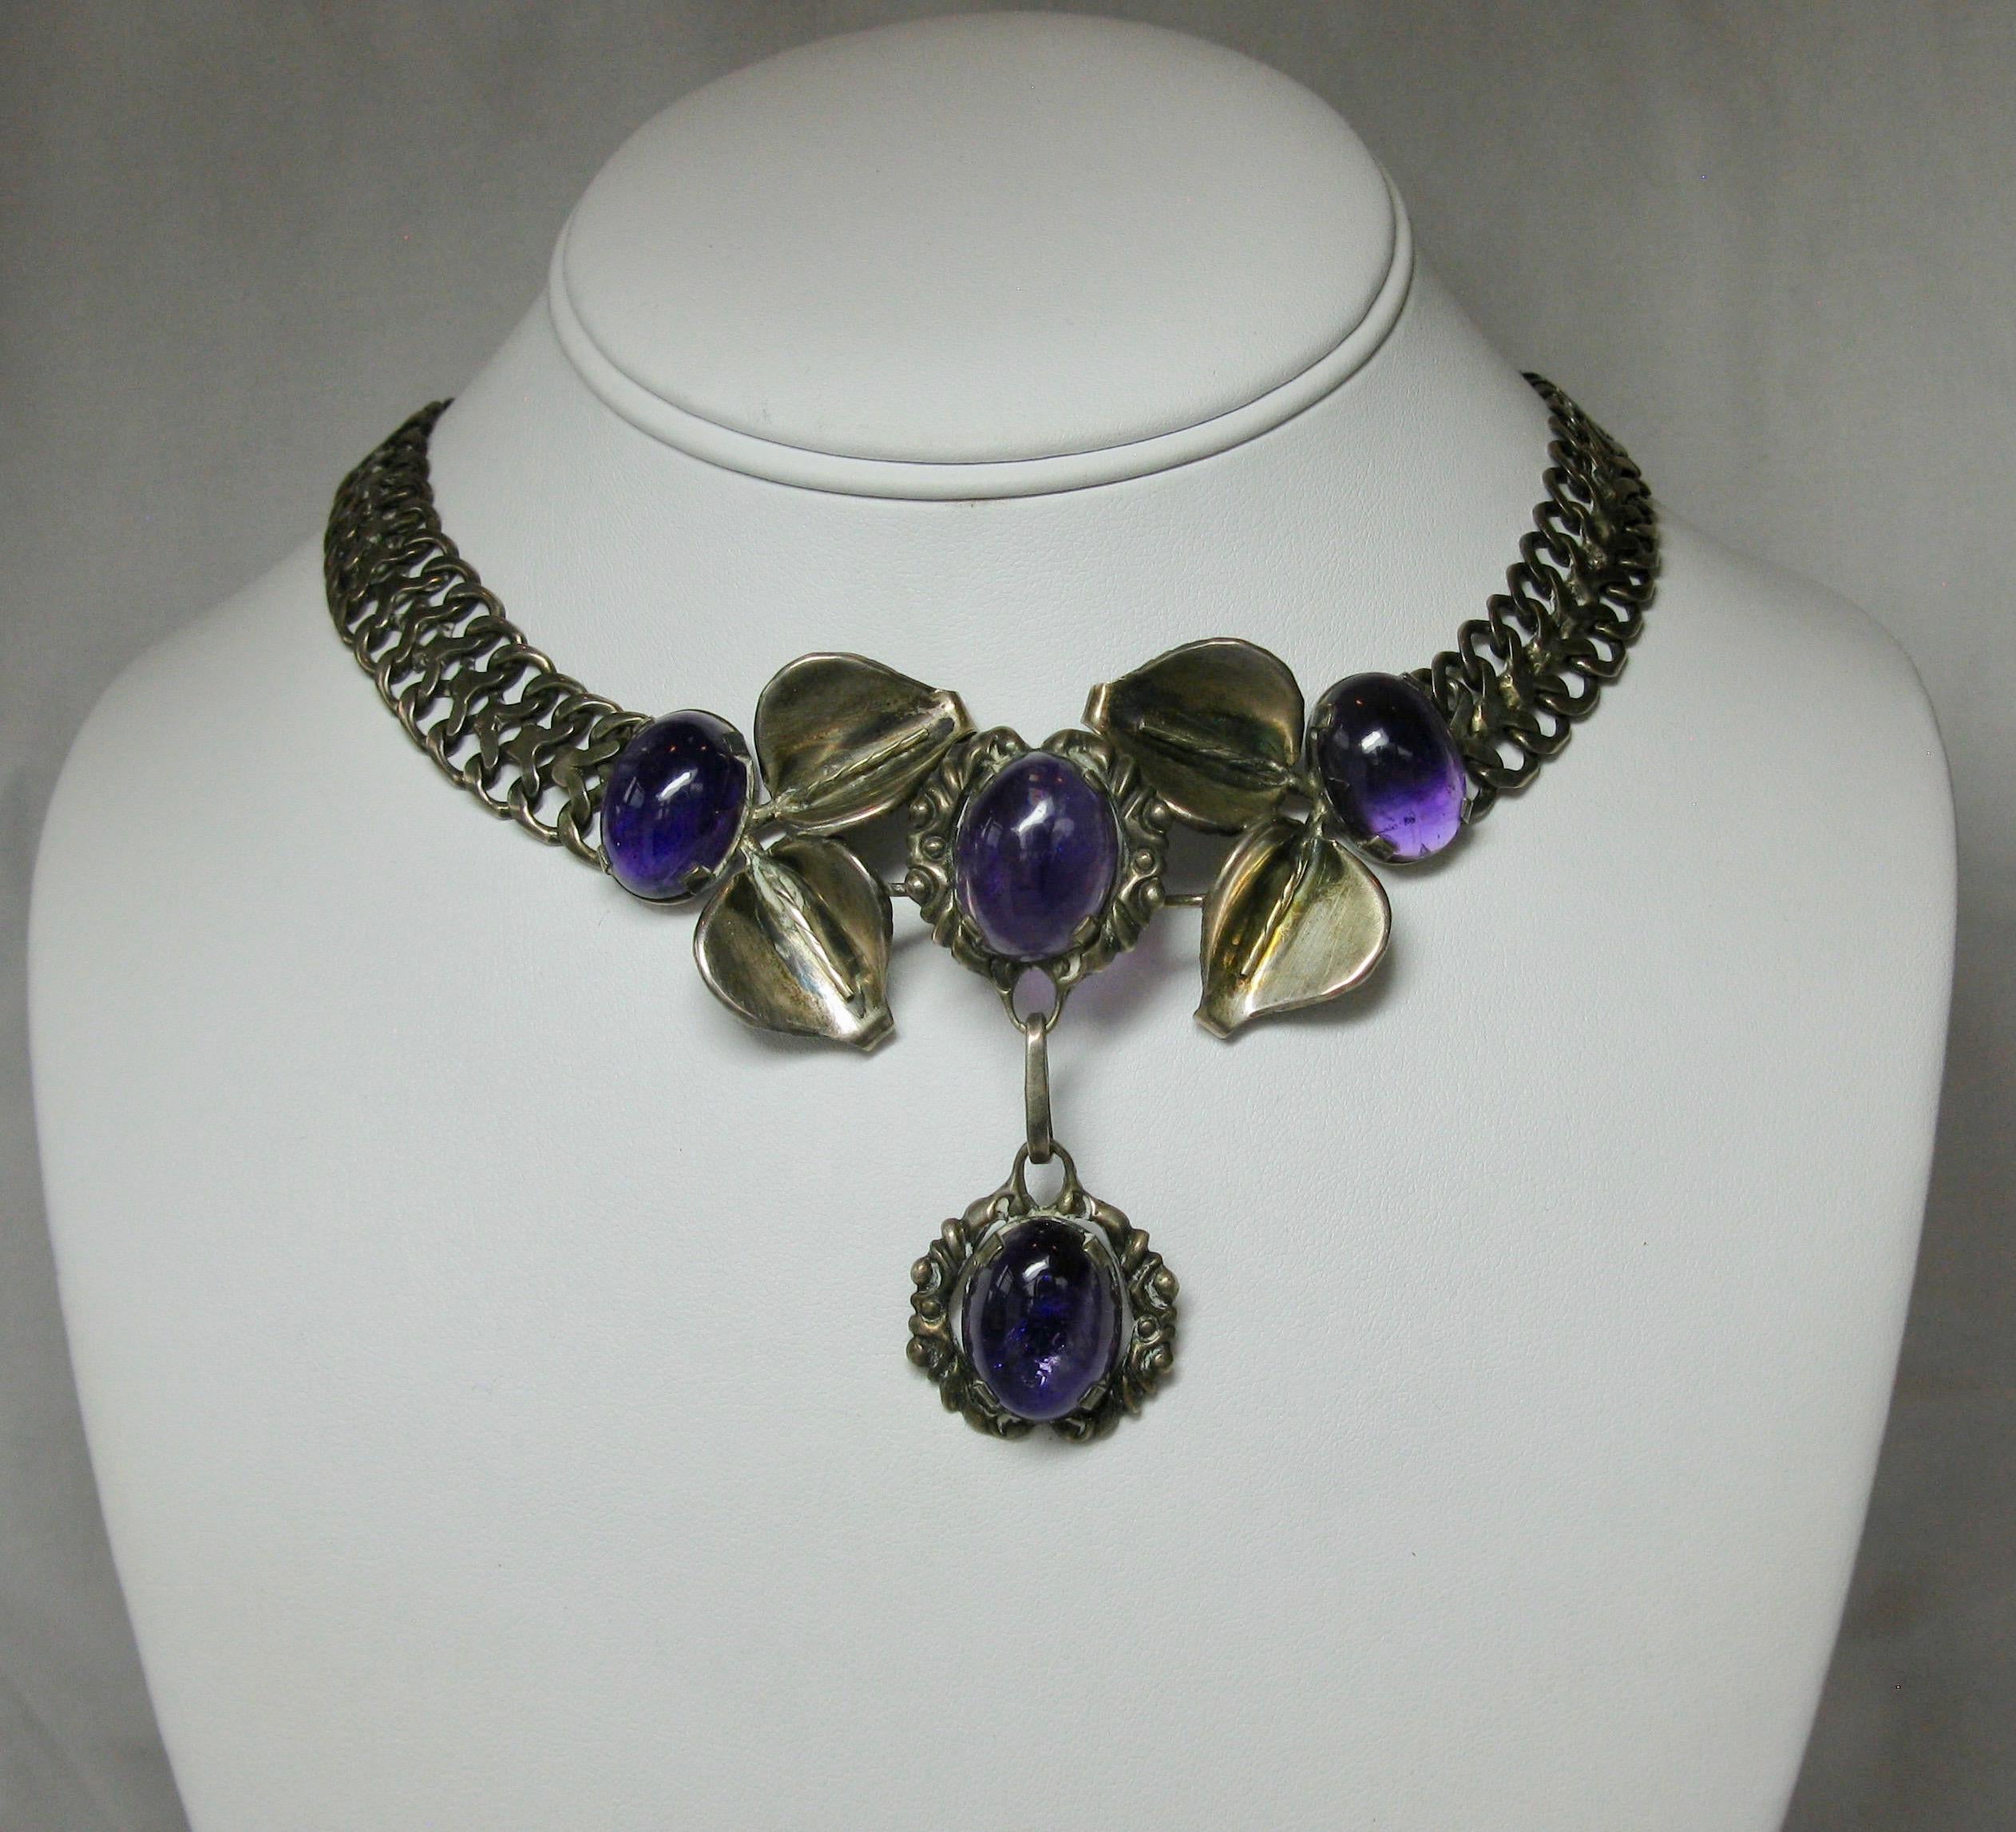 One of the finest Mexican Silver Amethyst Necklace and Earrings Suites.  The pieces are set with spectacular oval Amethyst cabochons in Sterling Silver.  The necklace is signed by the artist.  The Mid Century, Modern Jewels have a leaf motif design